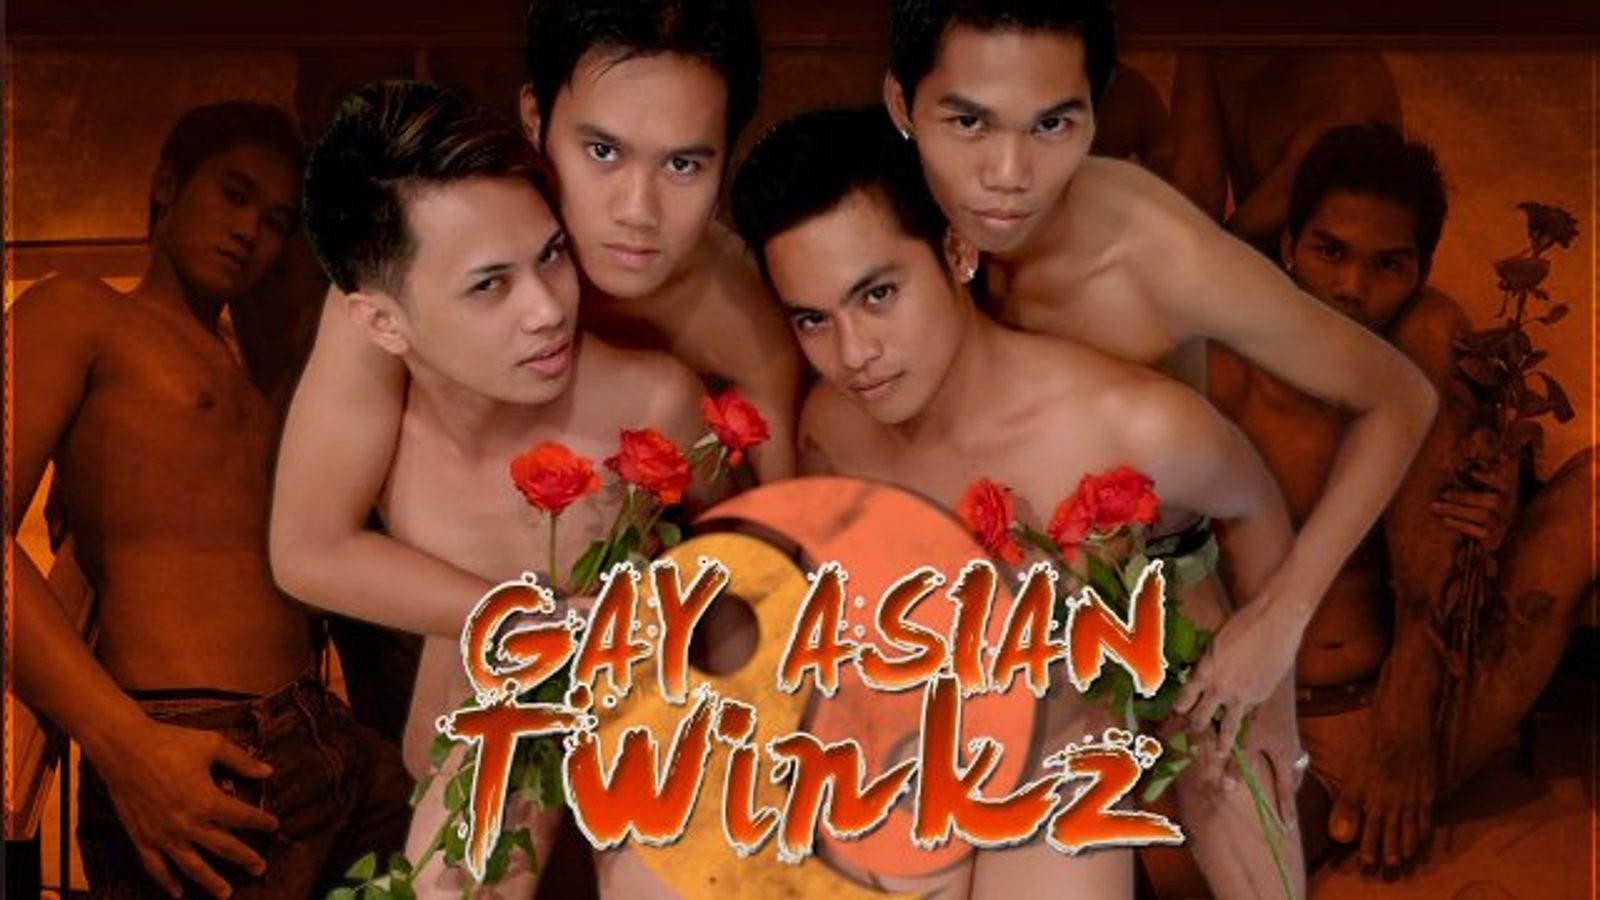 GayAsianTwinkz Productions to Launch Second DVD Line